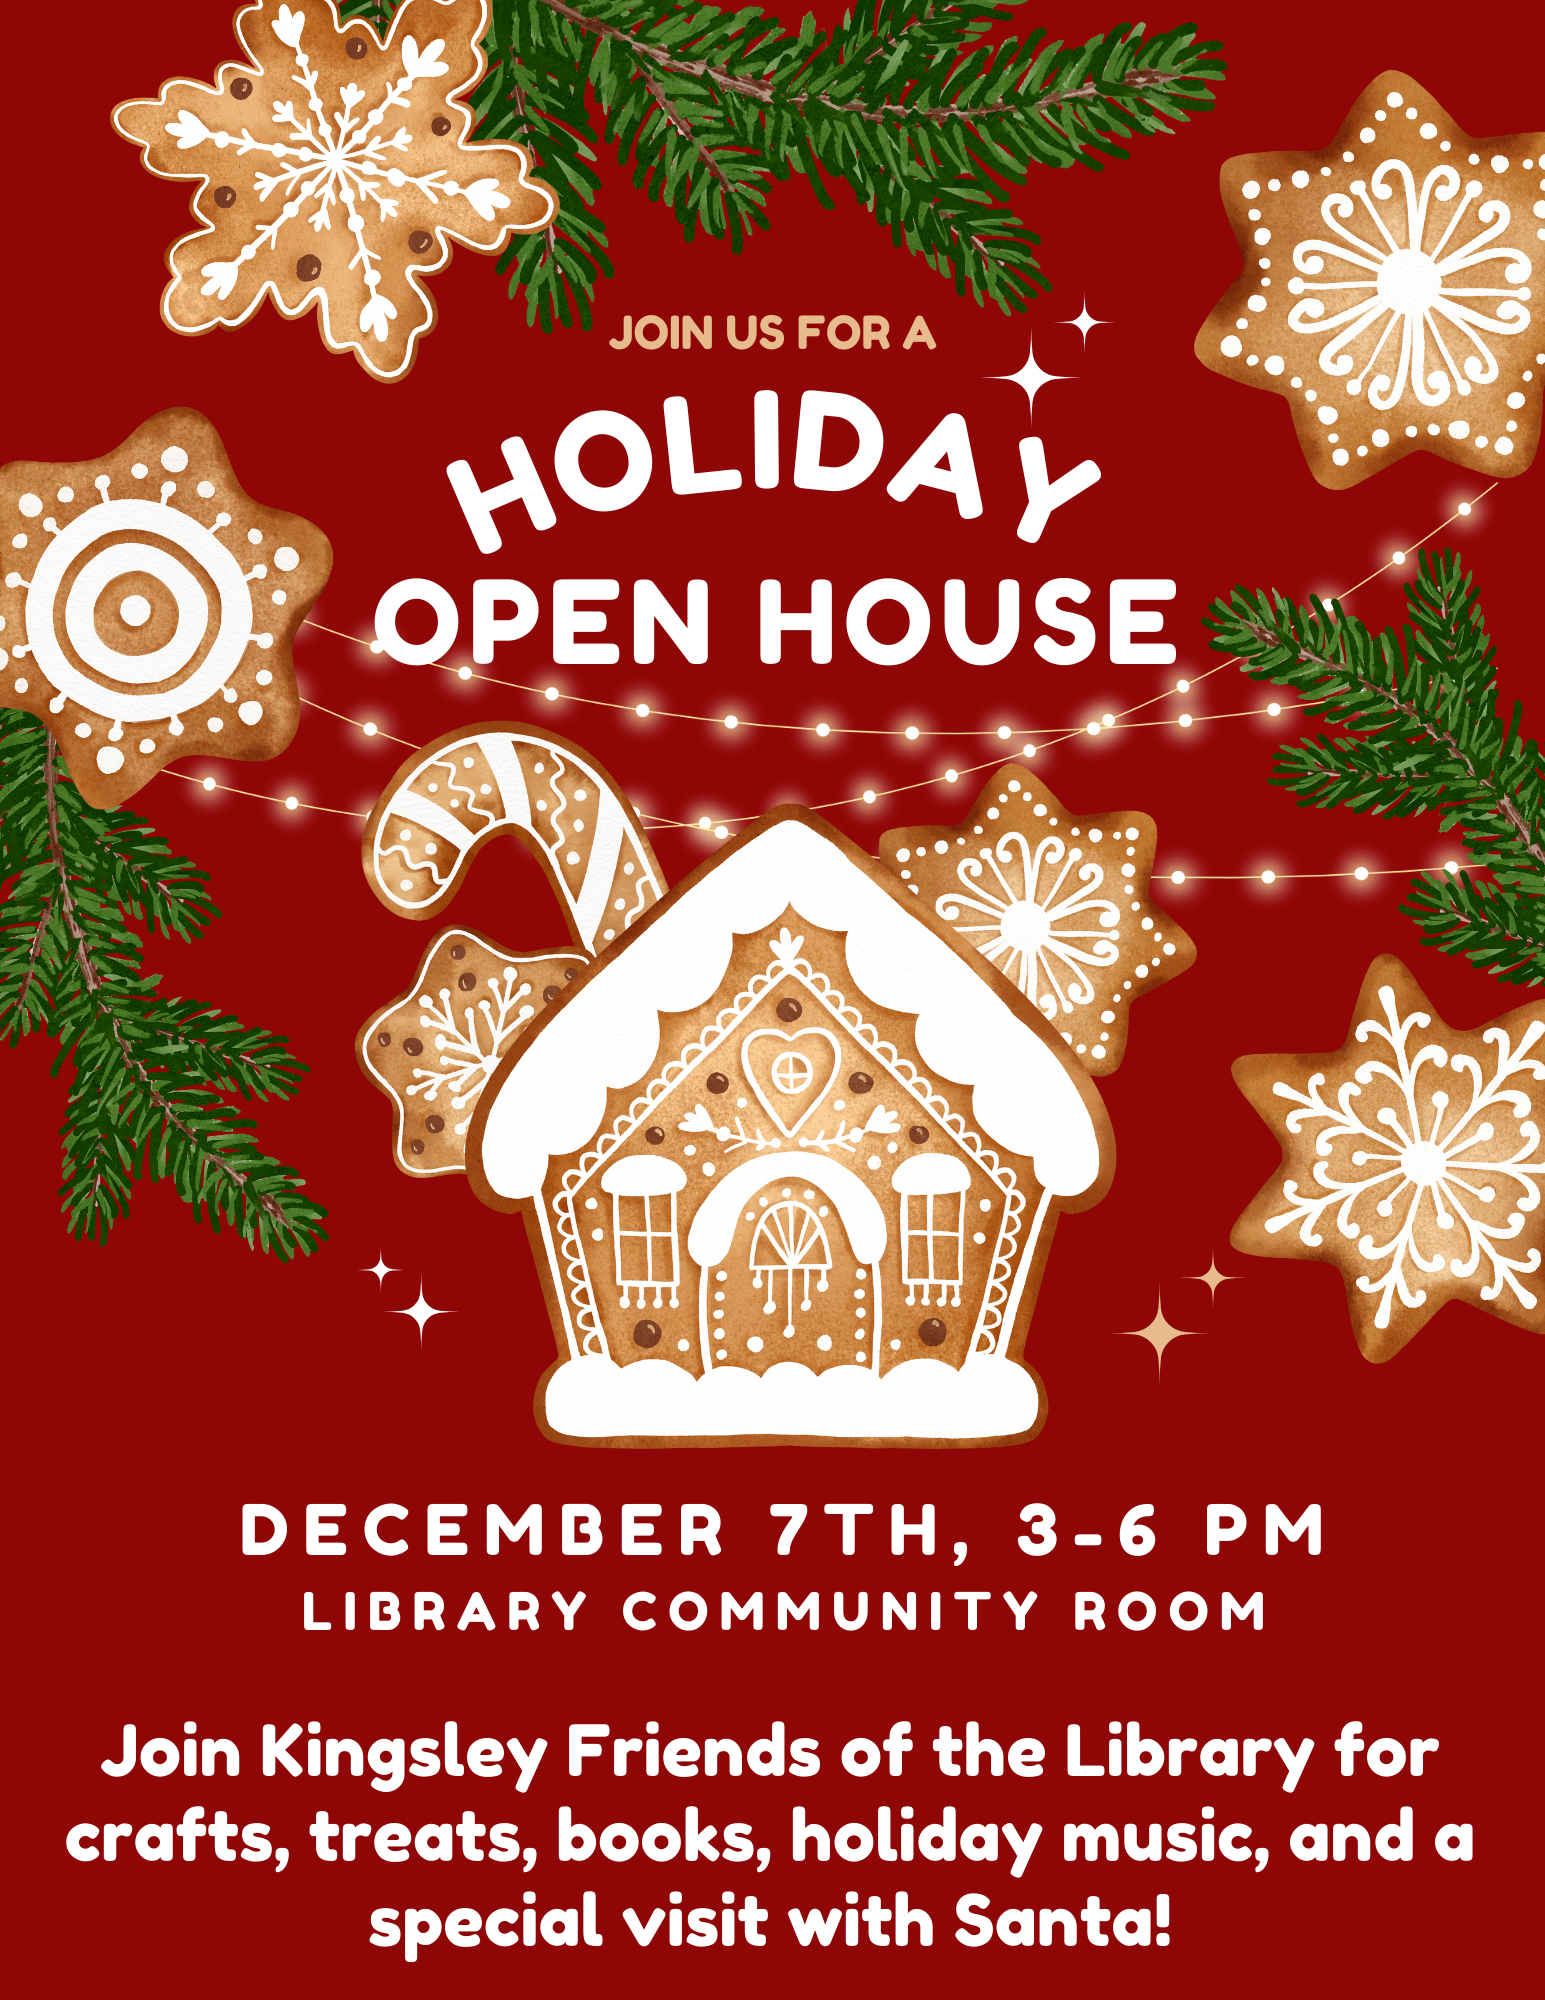 Image of a gingerbread house with the words "holiday open house by the Kingsley Friends of the Library" appearing in an arc above the house.